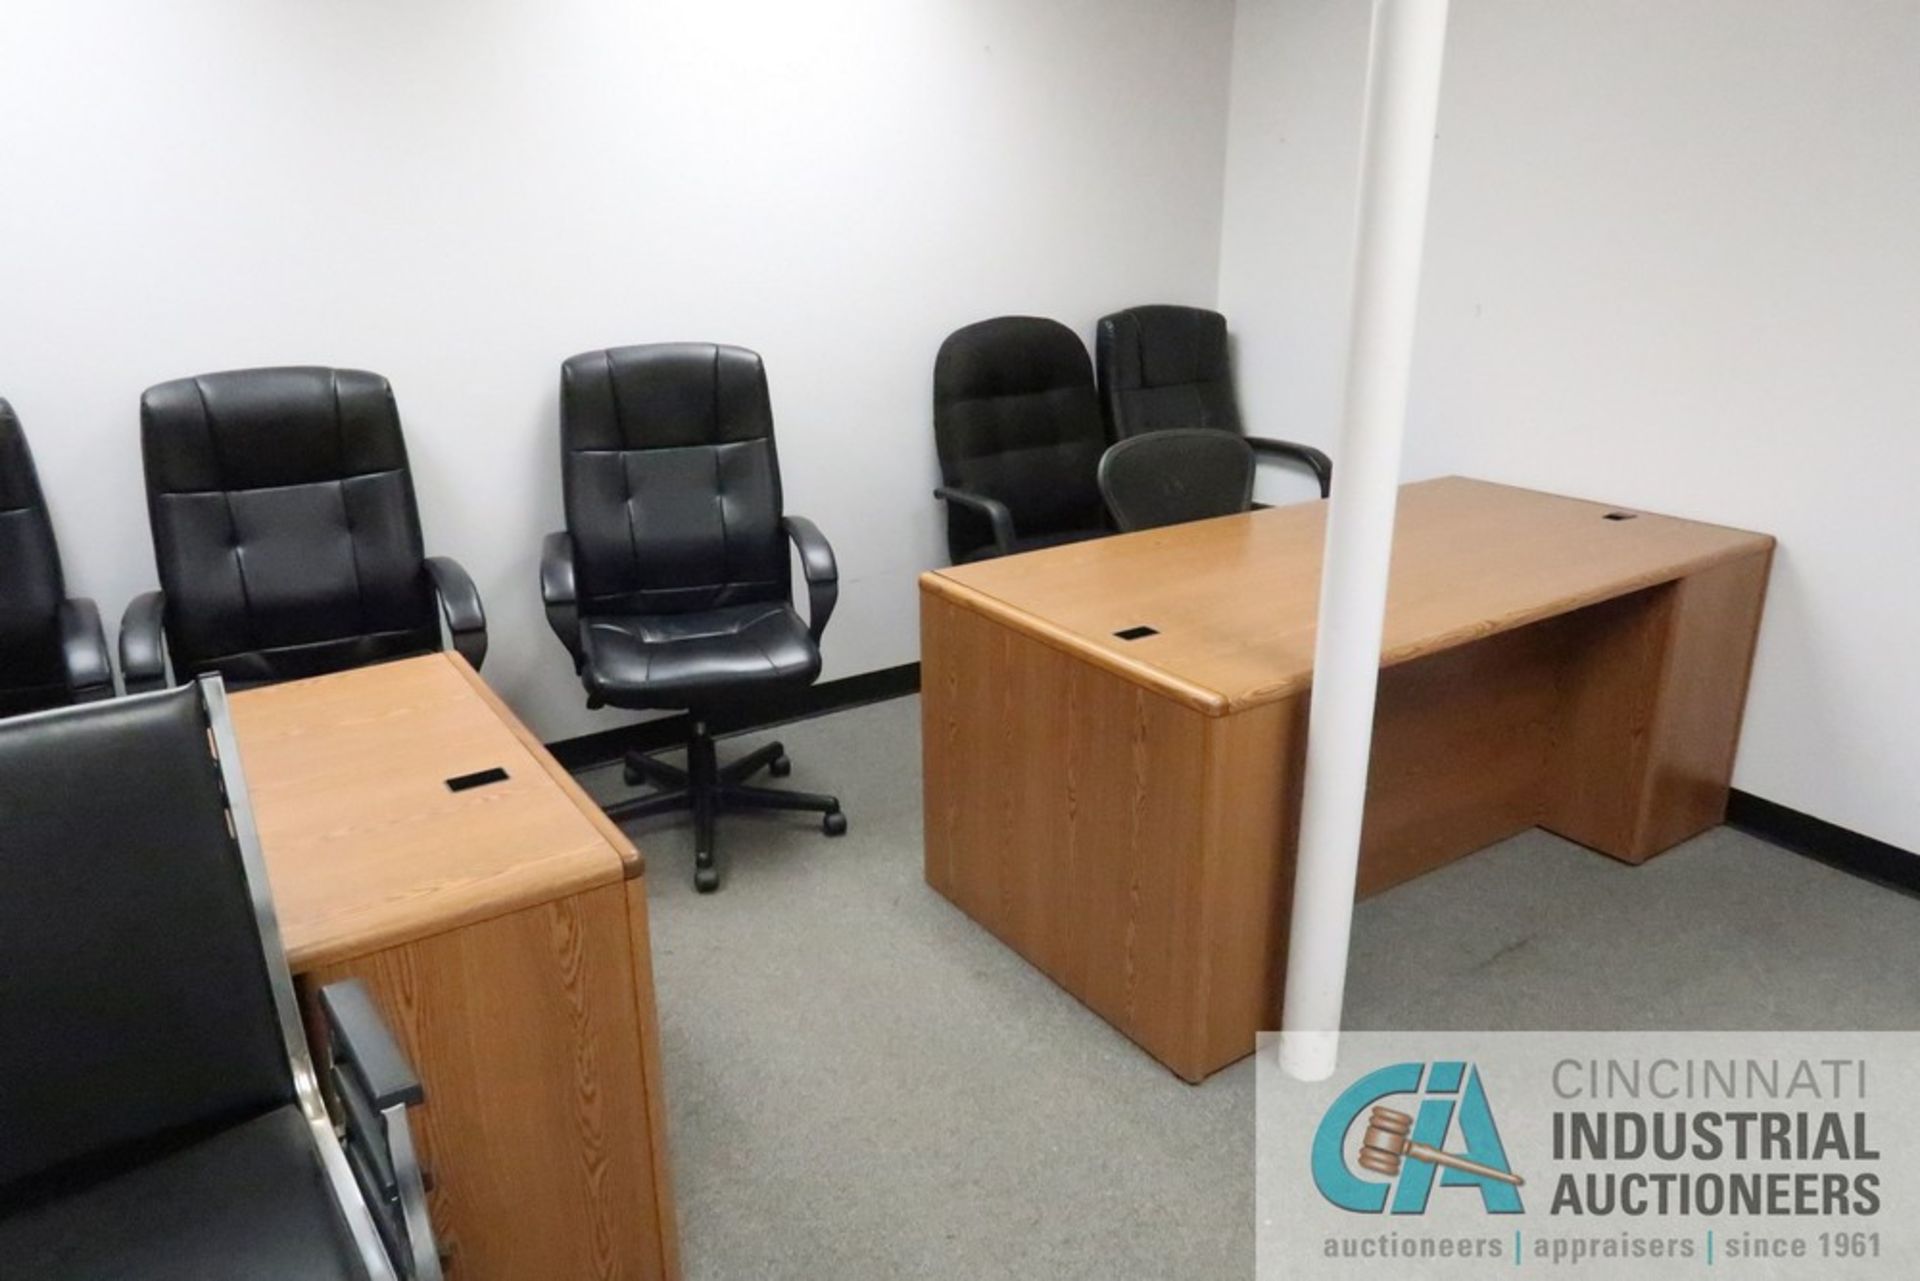 (LOT) CONTENTS OF OFFICE, FURNITURE ONLY - (12) CHAIRS, (2) DESKS, LETTER FILE, NO ELECTRONICS OR - Image 3 of 3